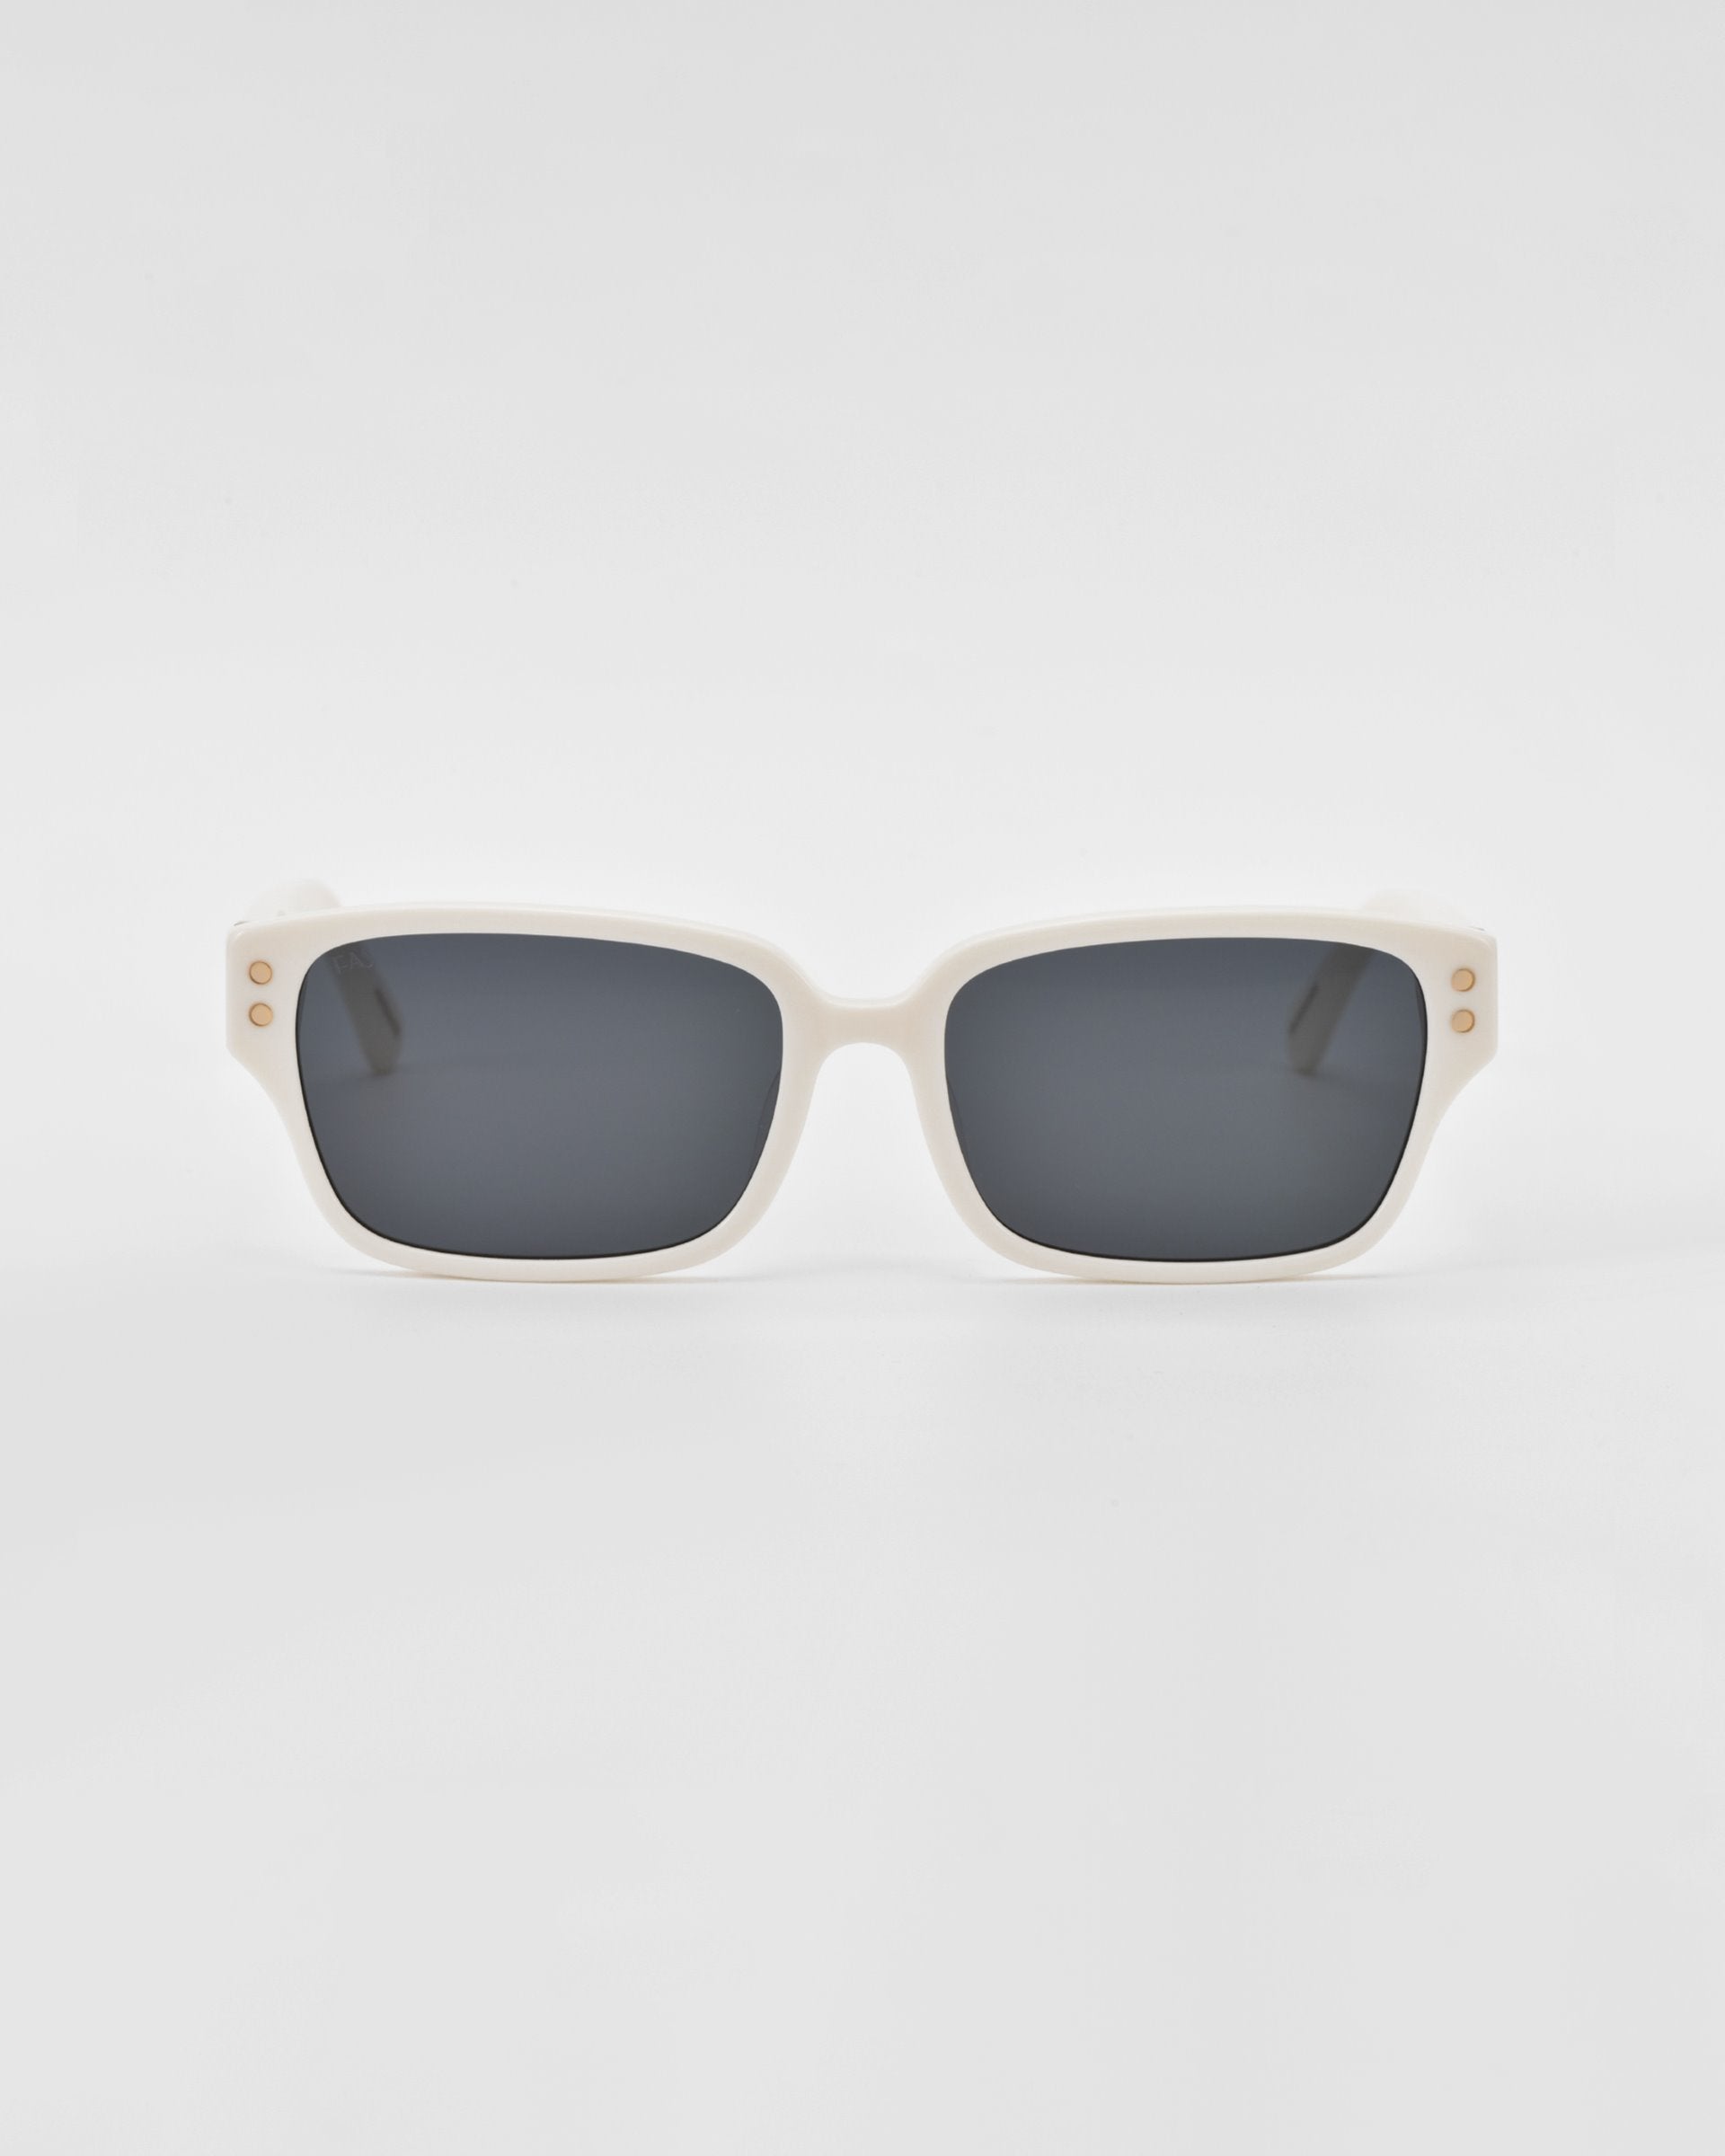 A pair of For Art's Sake® Zenith sunglasses with rectangular, white handcrafted acetate frames and dark lenses. The frames feature small, gold circular accents near the hinges on both sides. The background is plain and white, emphasizing the stylish design.